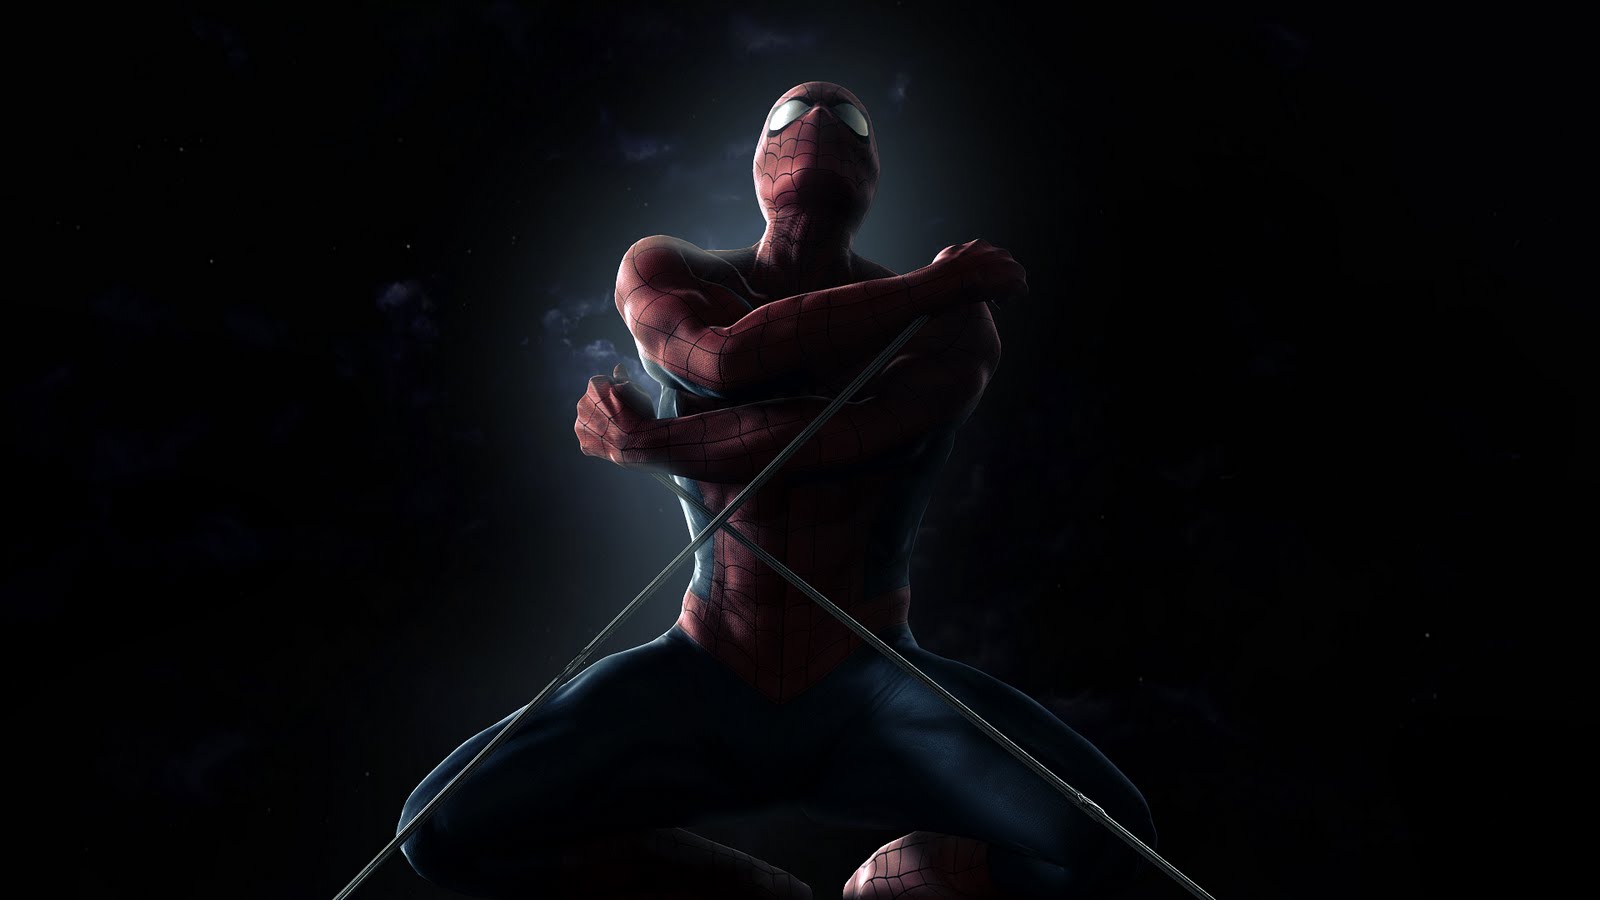 Spiderman HD Wallpaper Logo In For Your